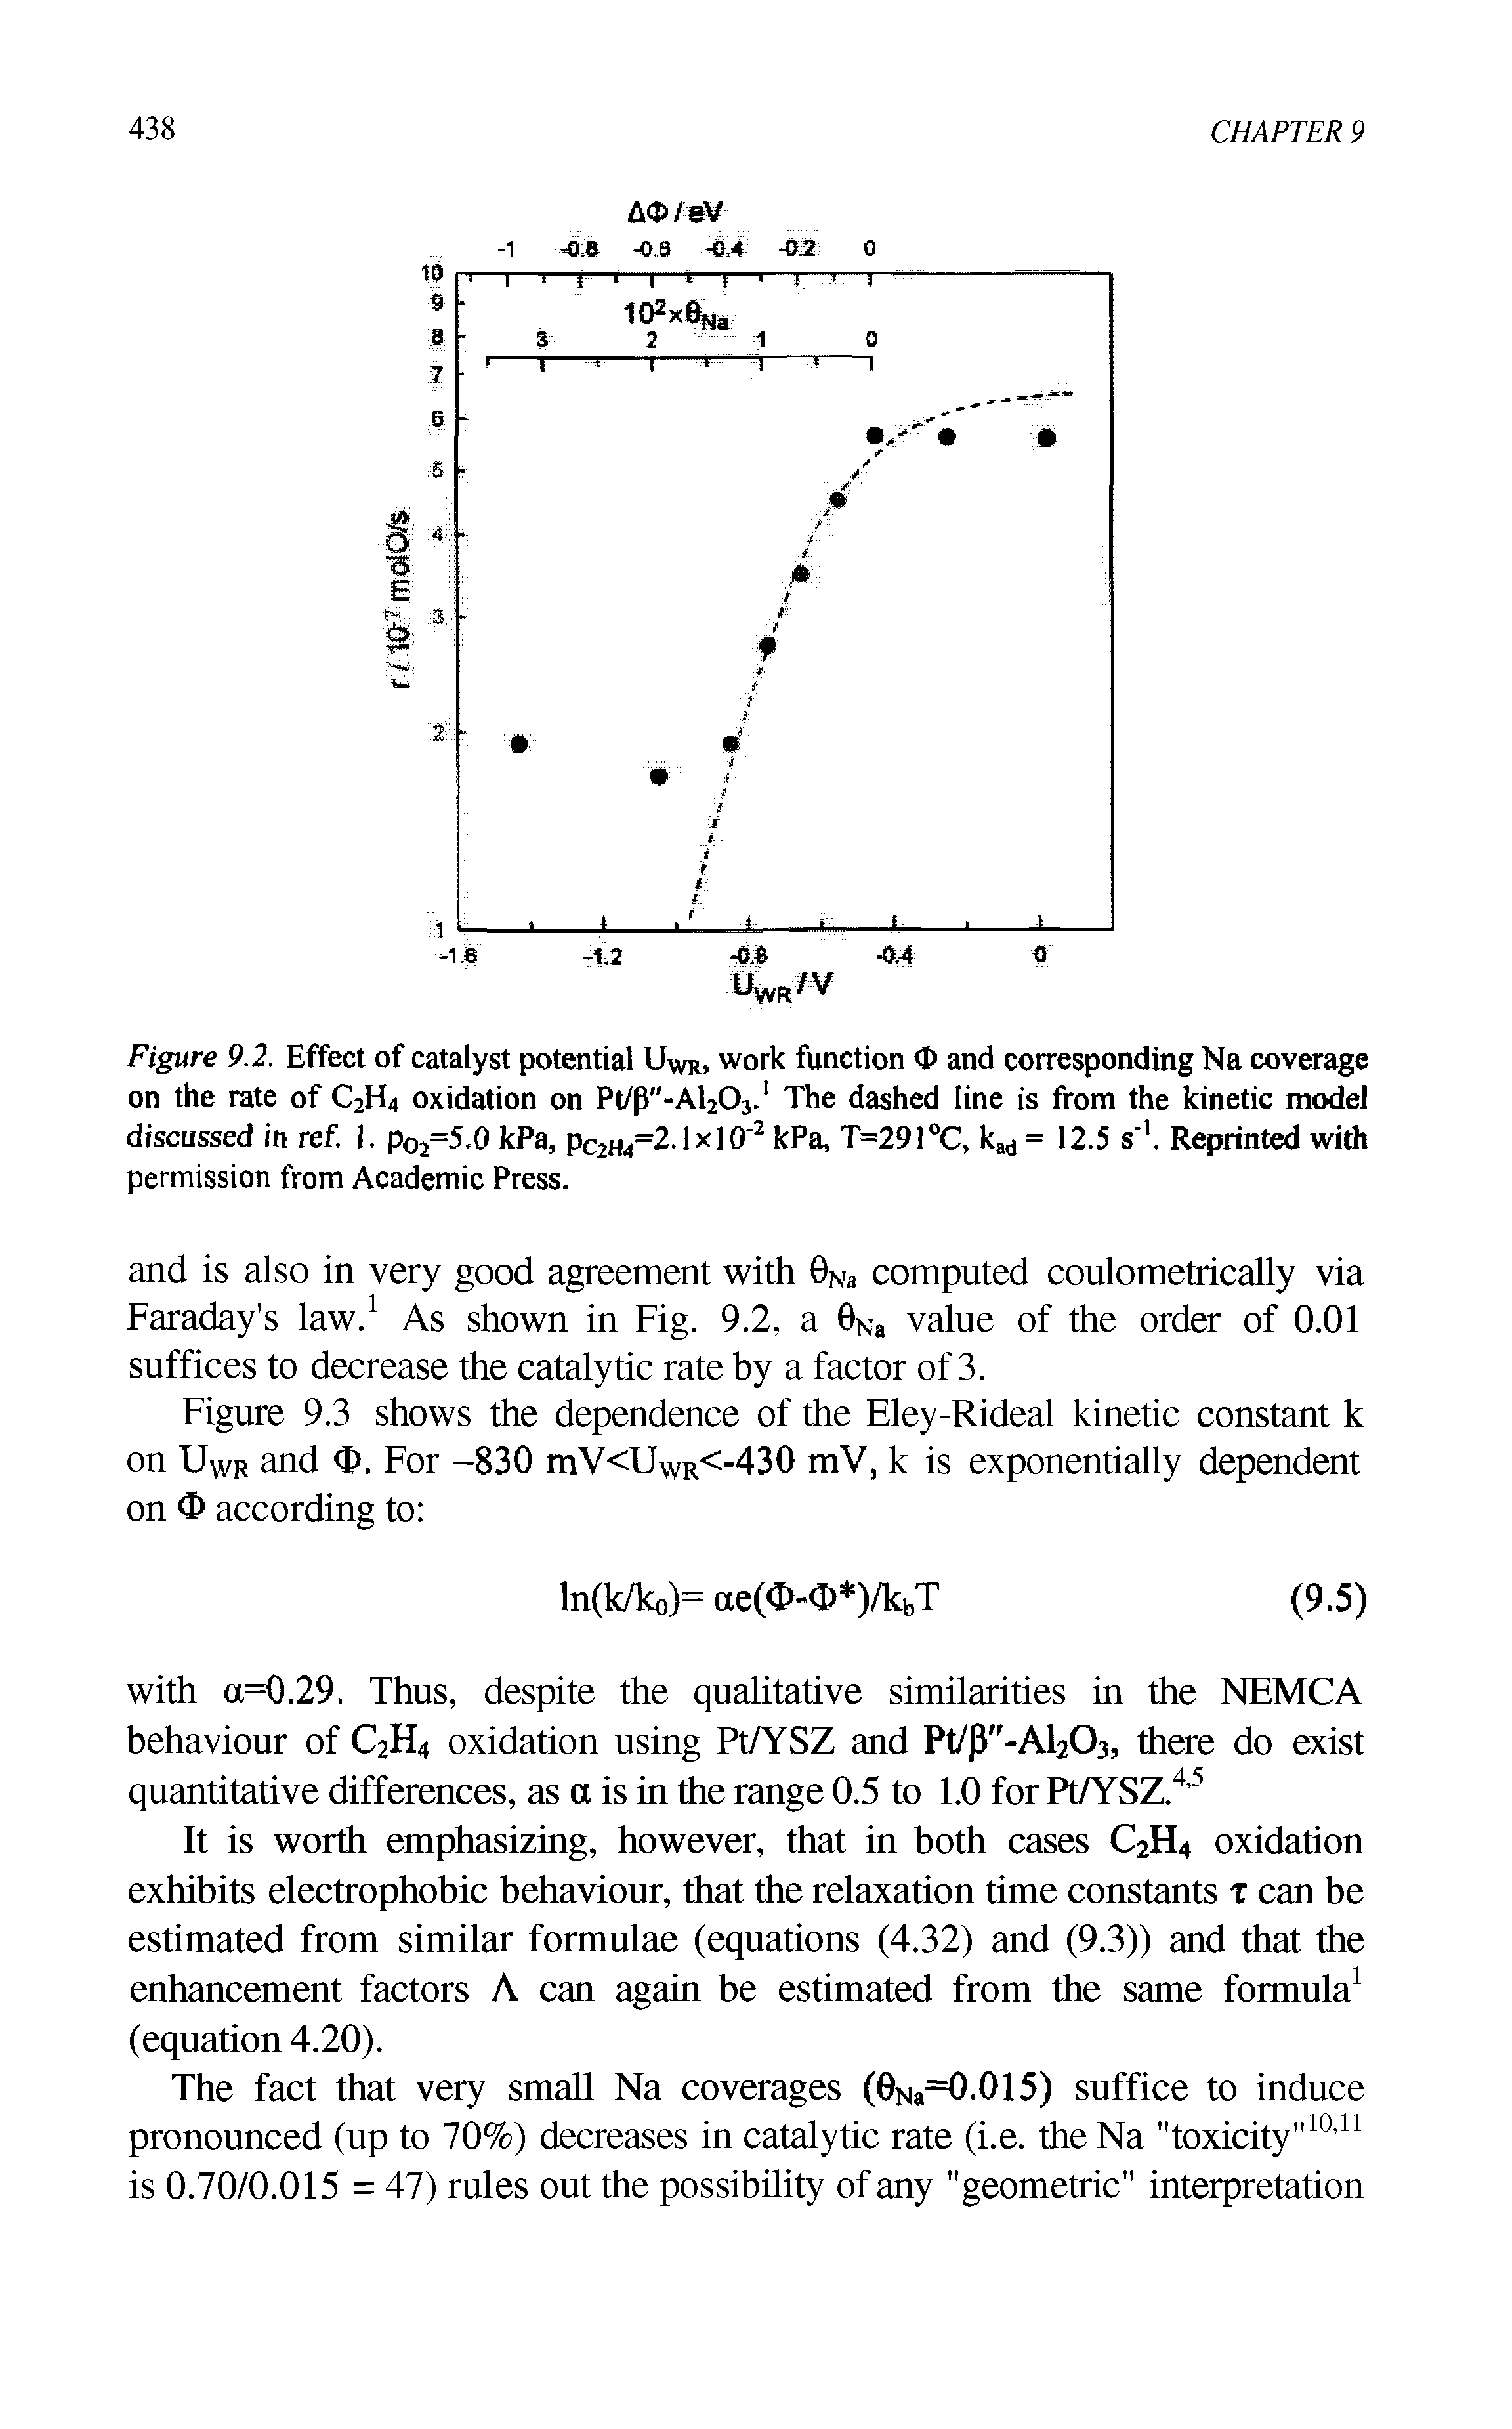 Figure 9.2. Effect of catalyst potential Uwr, work function 0 and corresponding Na coverage on the rate of C2H4 oxidation on Pt/p"-Al203.1 The dashed line is from the kinetic model discussed in ref. 1. pO2=5.0 kPa, pC2H4=2-1 x 1 O 2 kPa, T=291°C, kad = 12.5 s 1. Reprinted with permission from Academic Press.